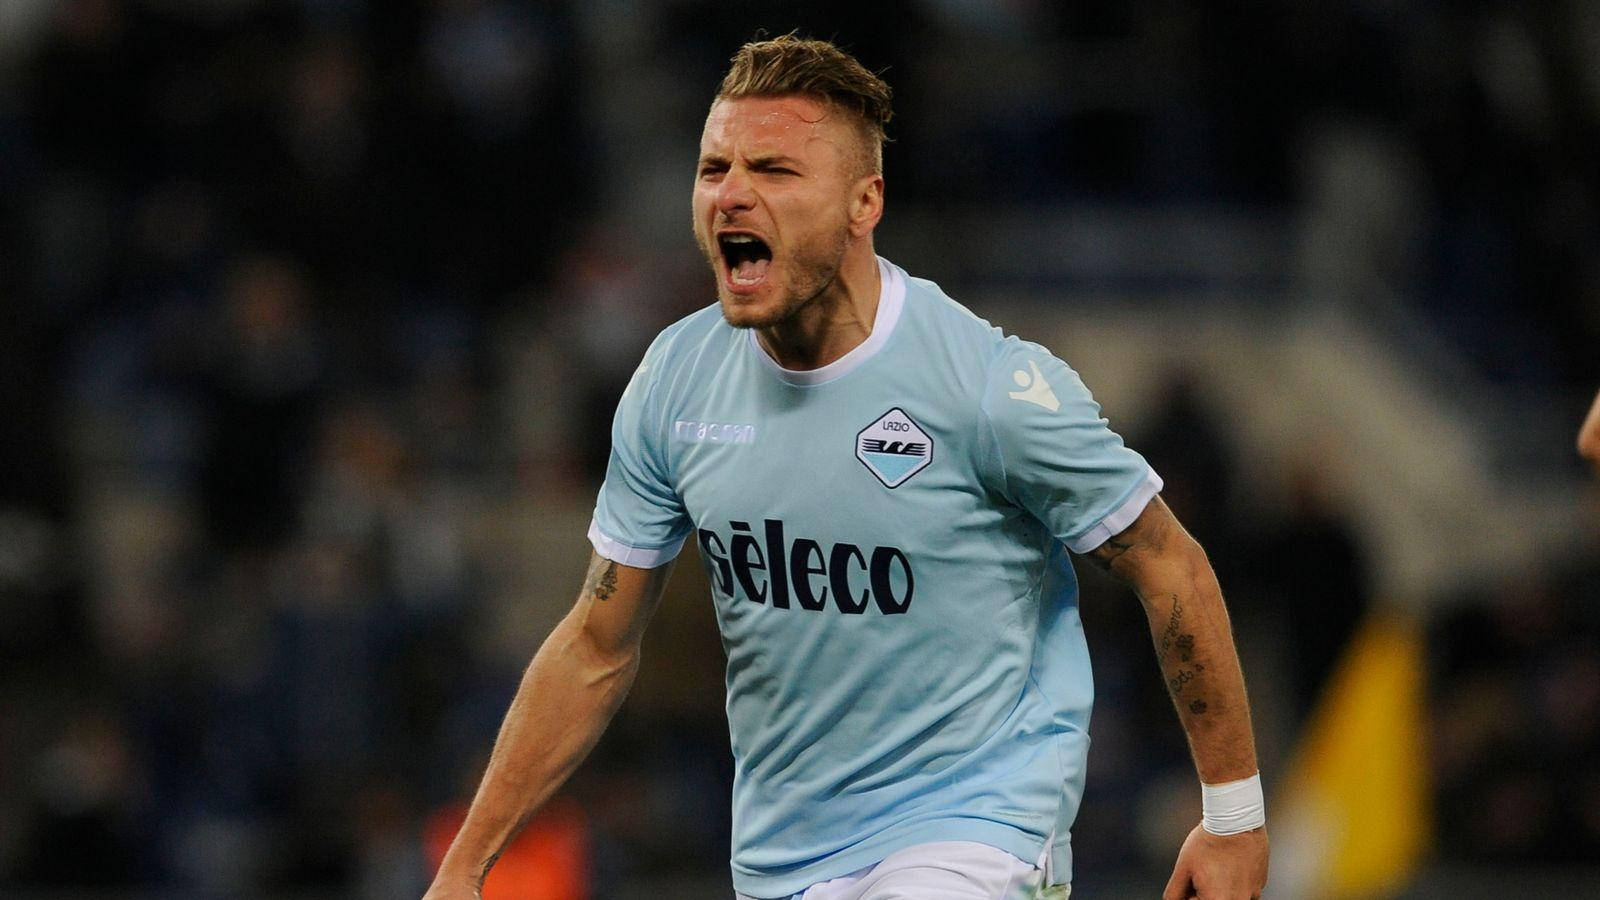 Ciro Immobile In Action On The Football Field